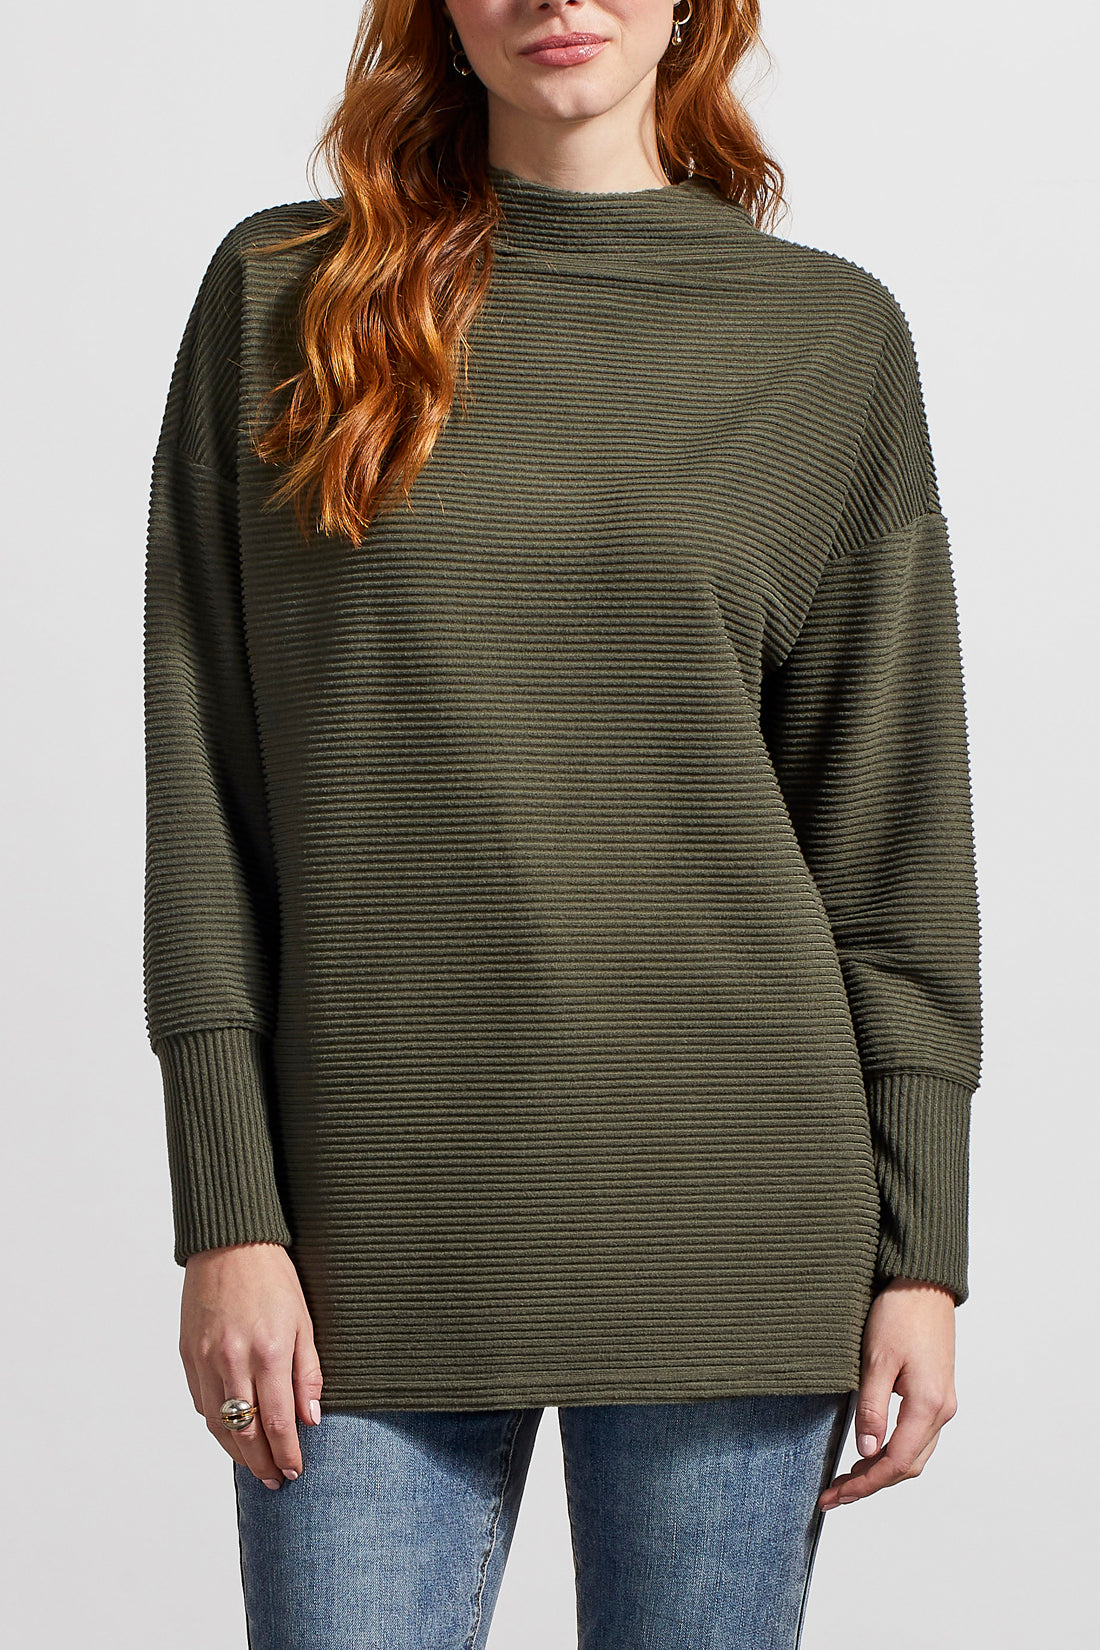 Funnel Neck Tunic With Side Slits 7913O-4860